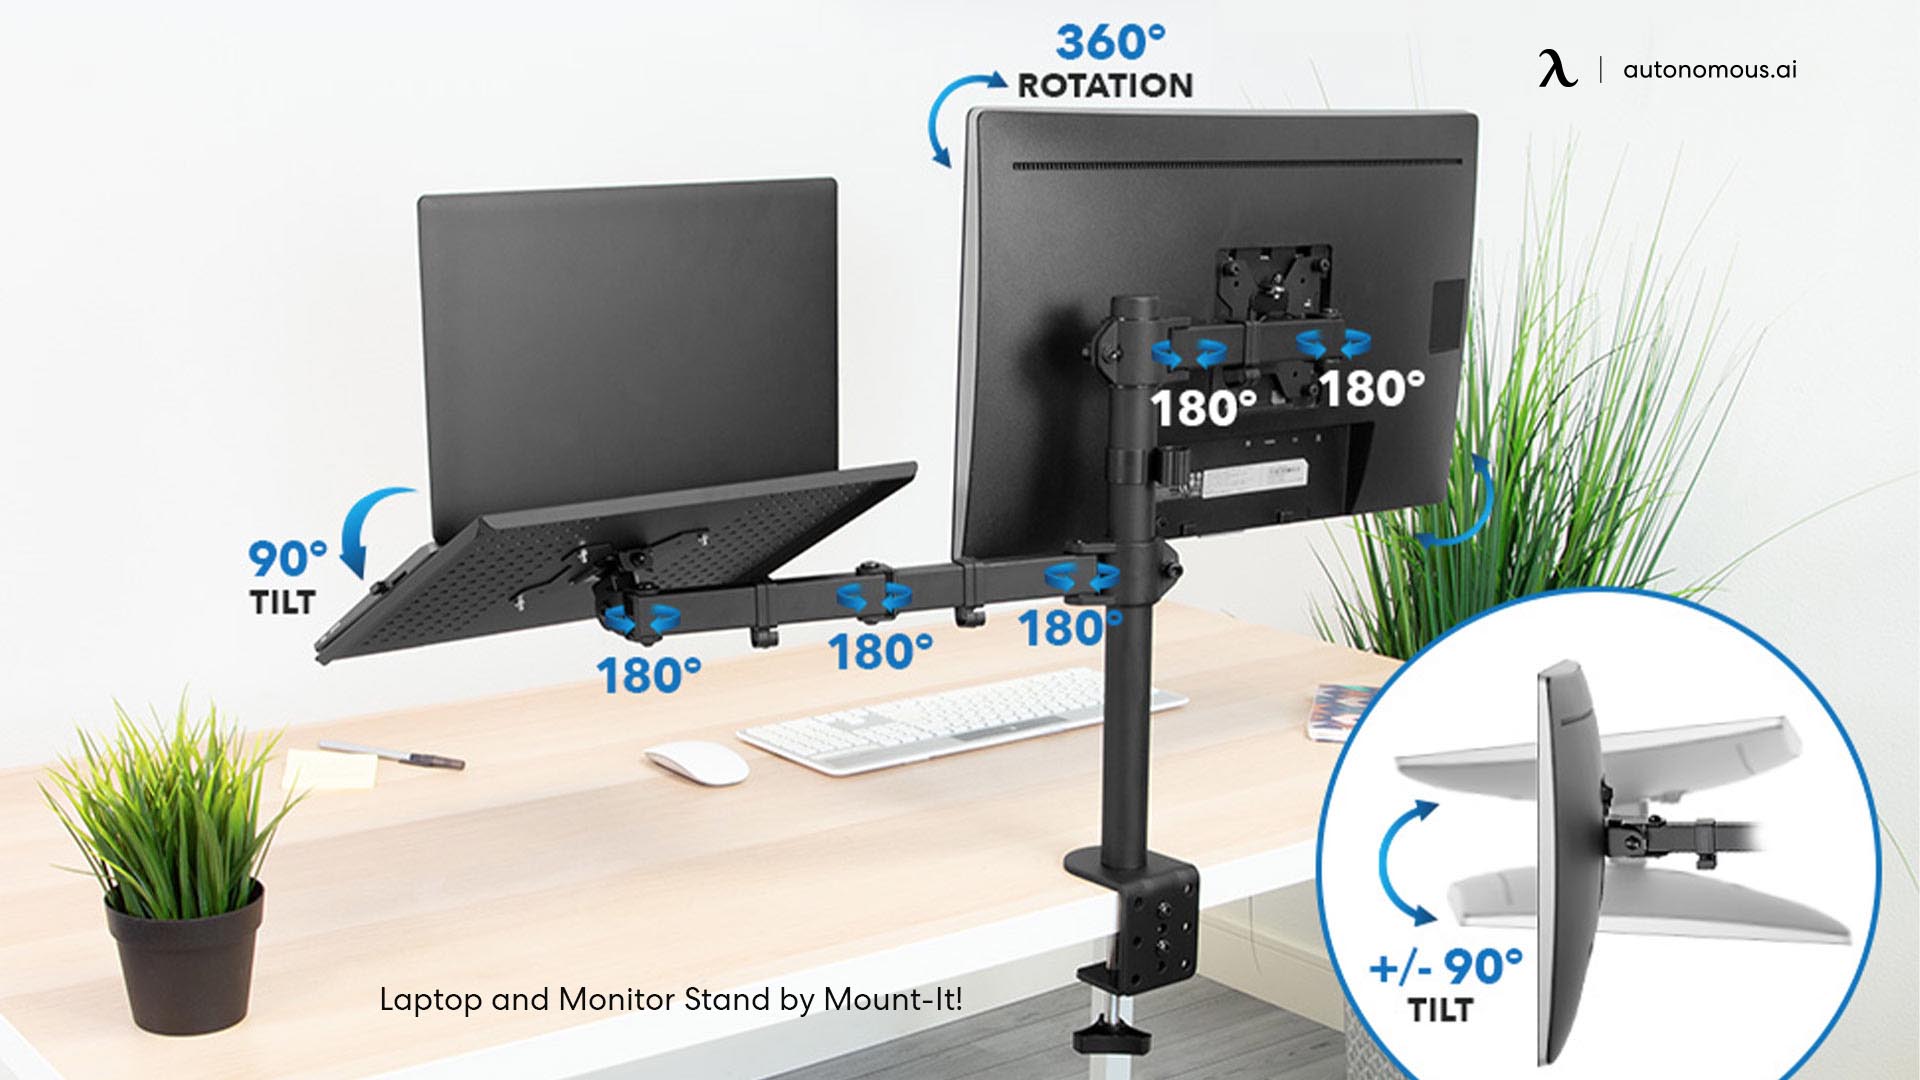 Laptop and Monitor Stand by Mount-It!